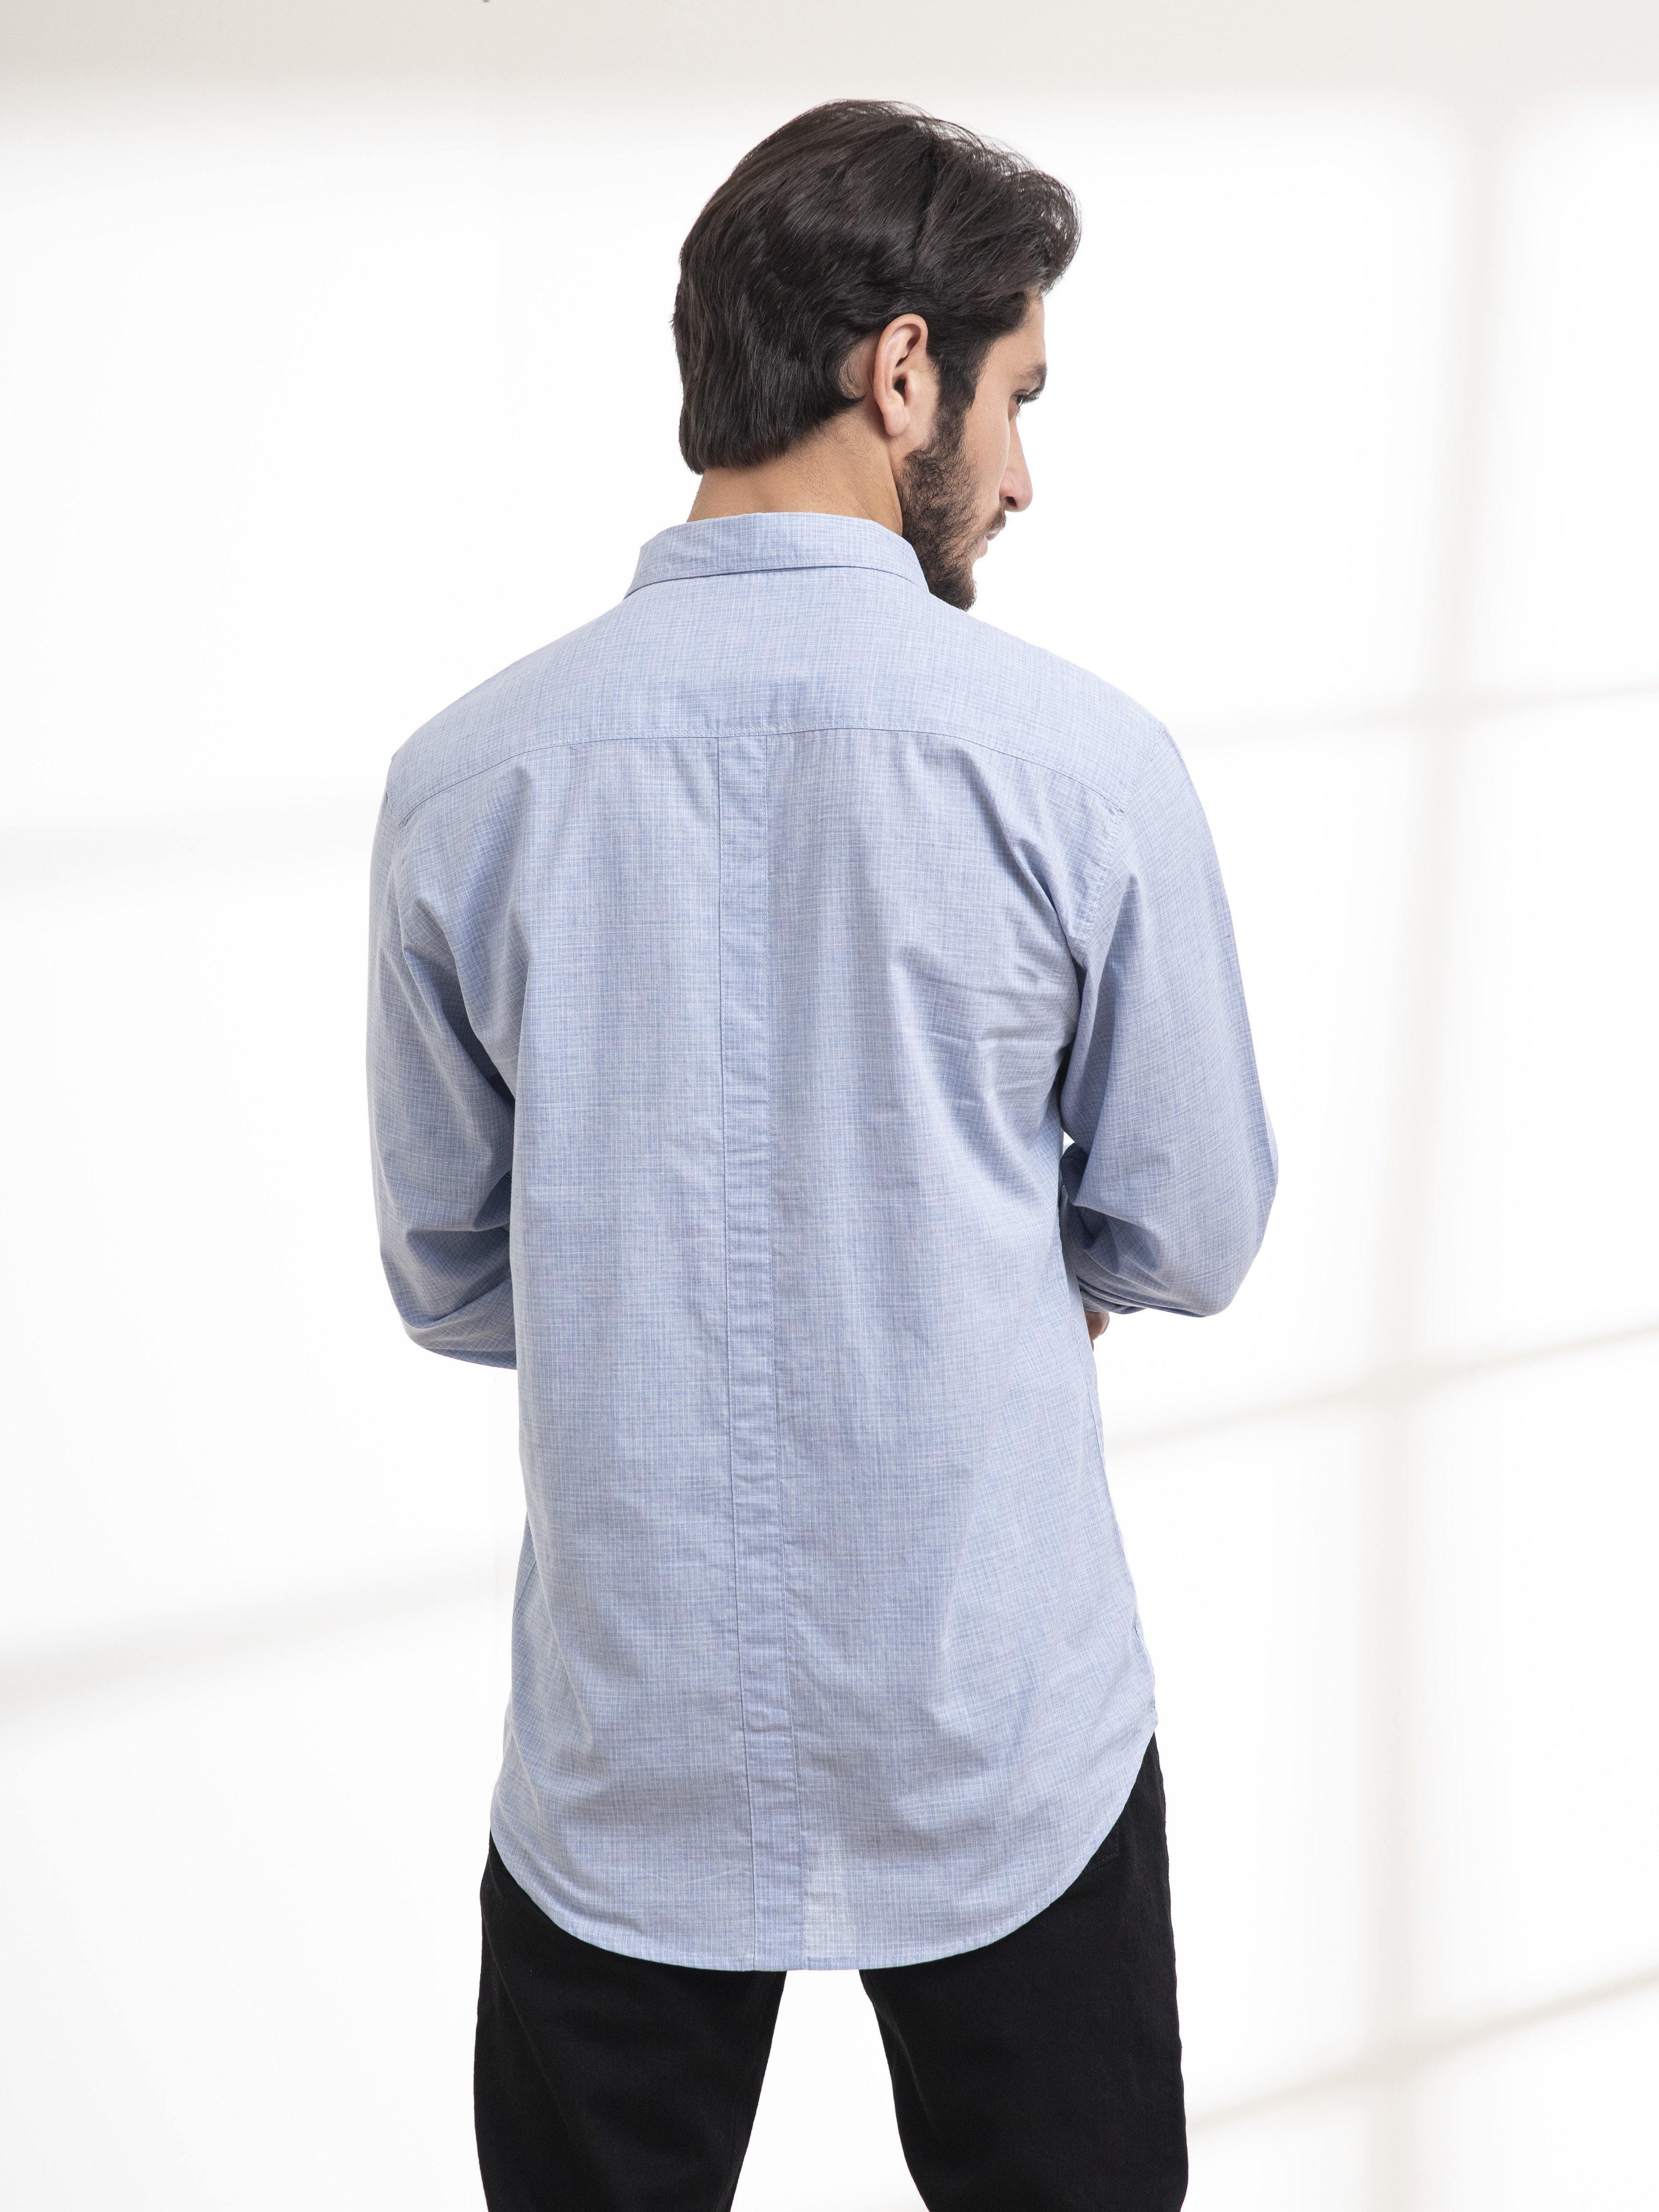 CASUAL SHIRT FULL SLEEVE SKY BLUE at Charcoal Clothing